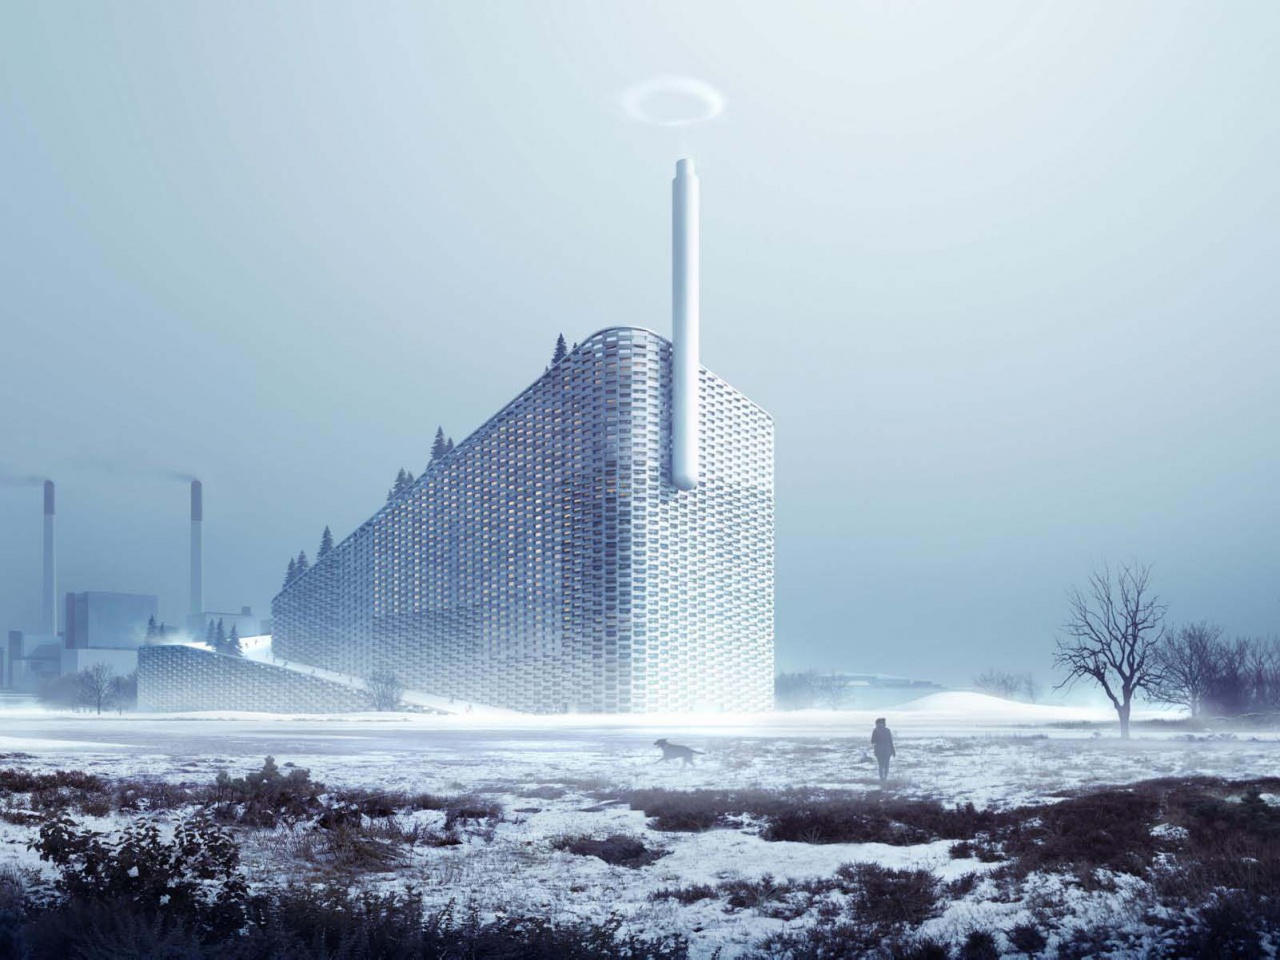 Amager Bakke, a modern waste-to-energy plant by BIG Architects, awarded at European Steel Design Awards 2017